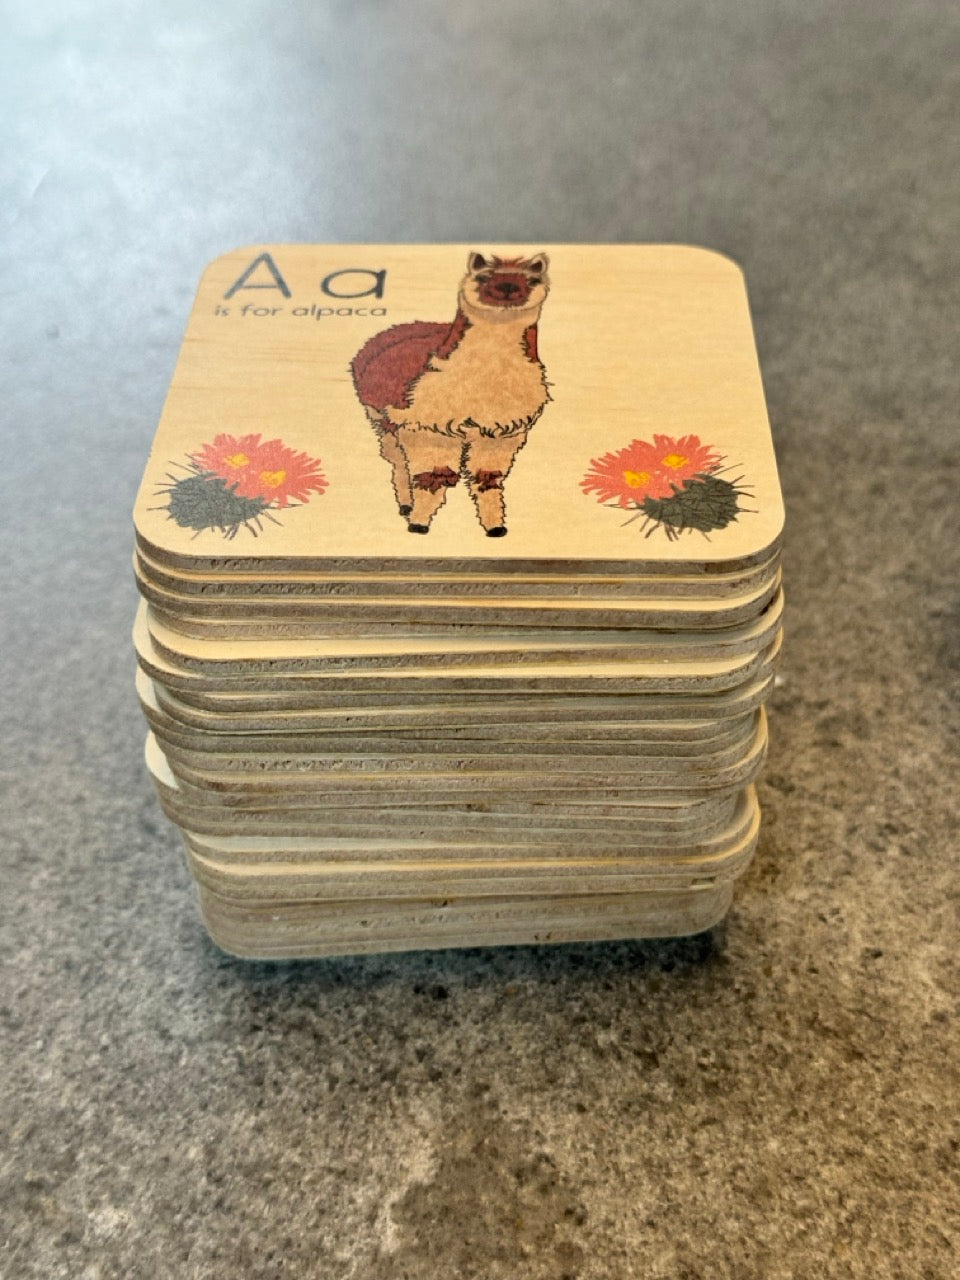 Easy-as-ABC Timber Learning Tiles (Natural)